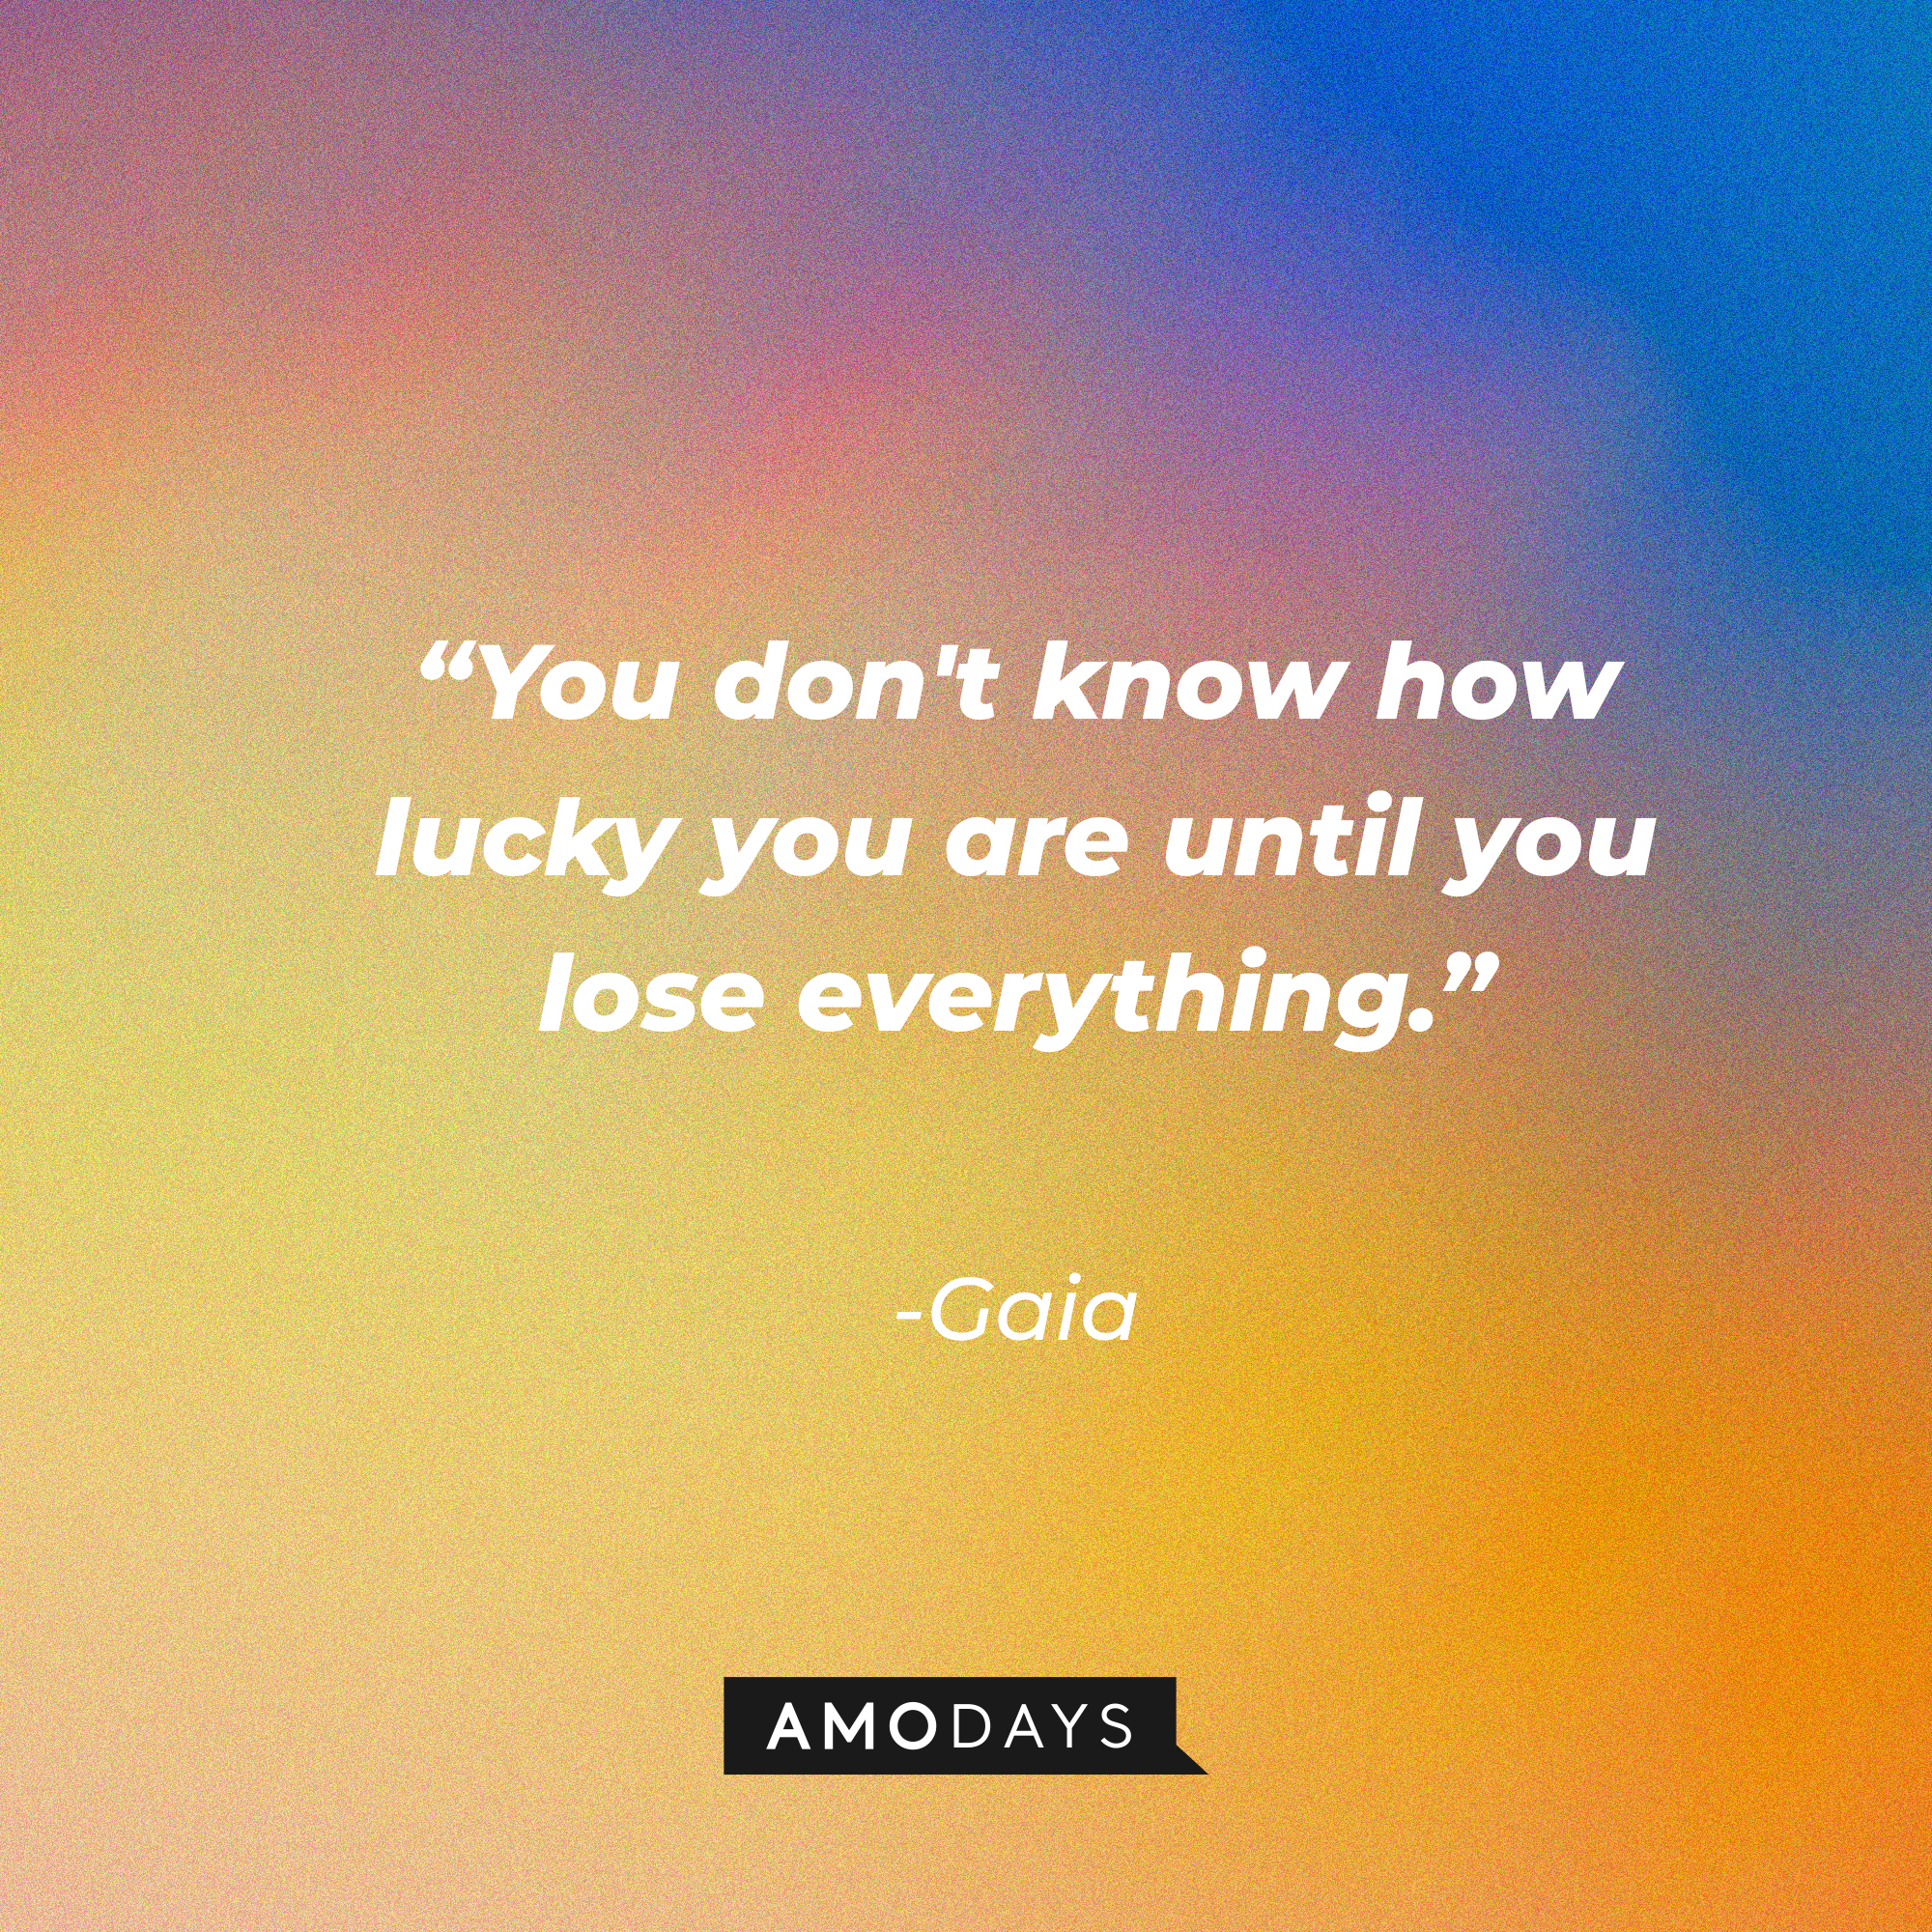 Gaia's quote: “You don't know how lucky you are until you lose everything.” | Source: Amodays